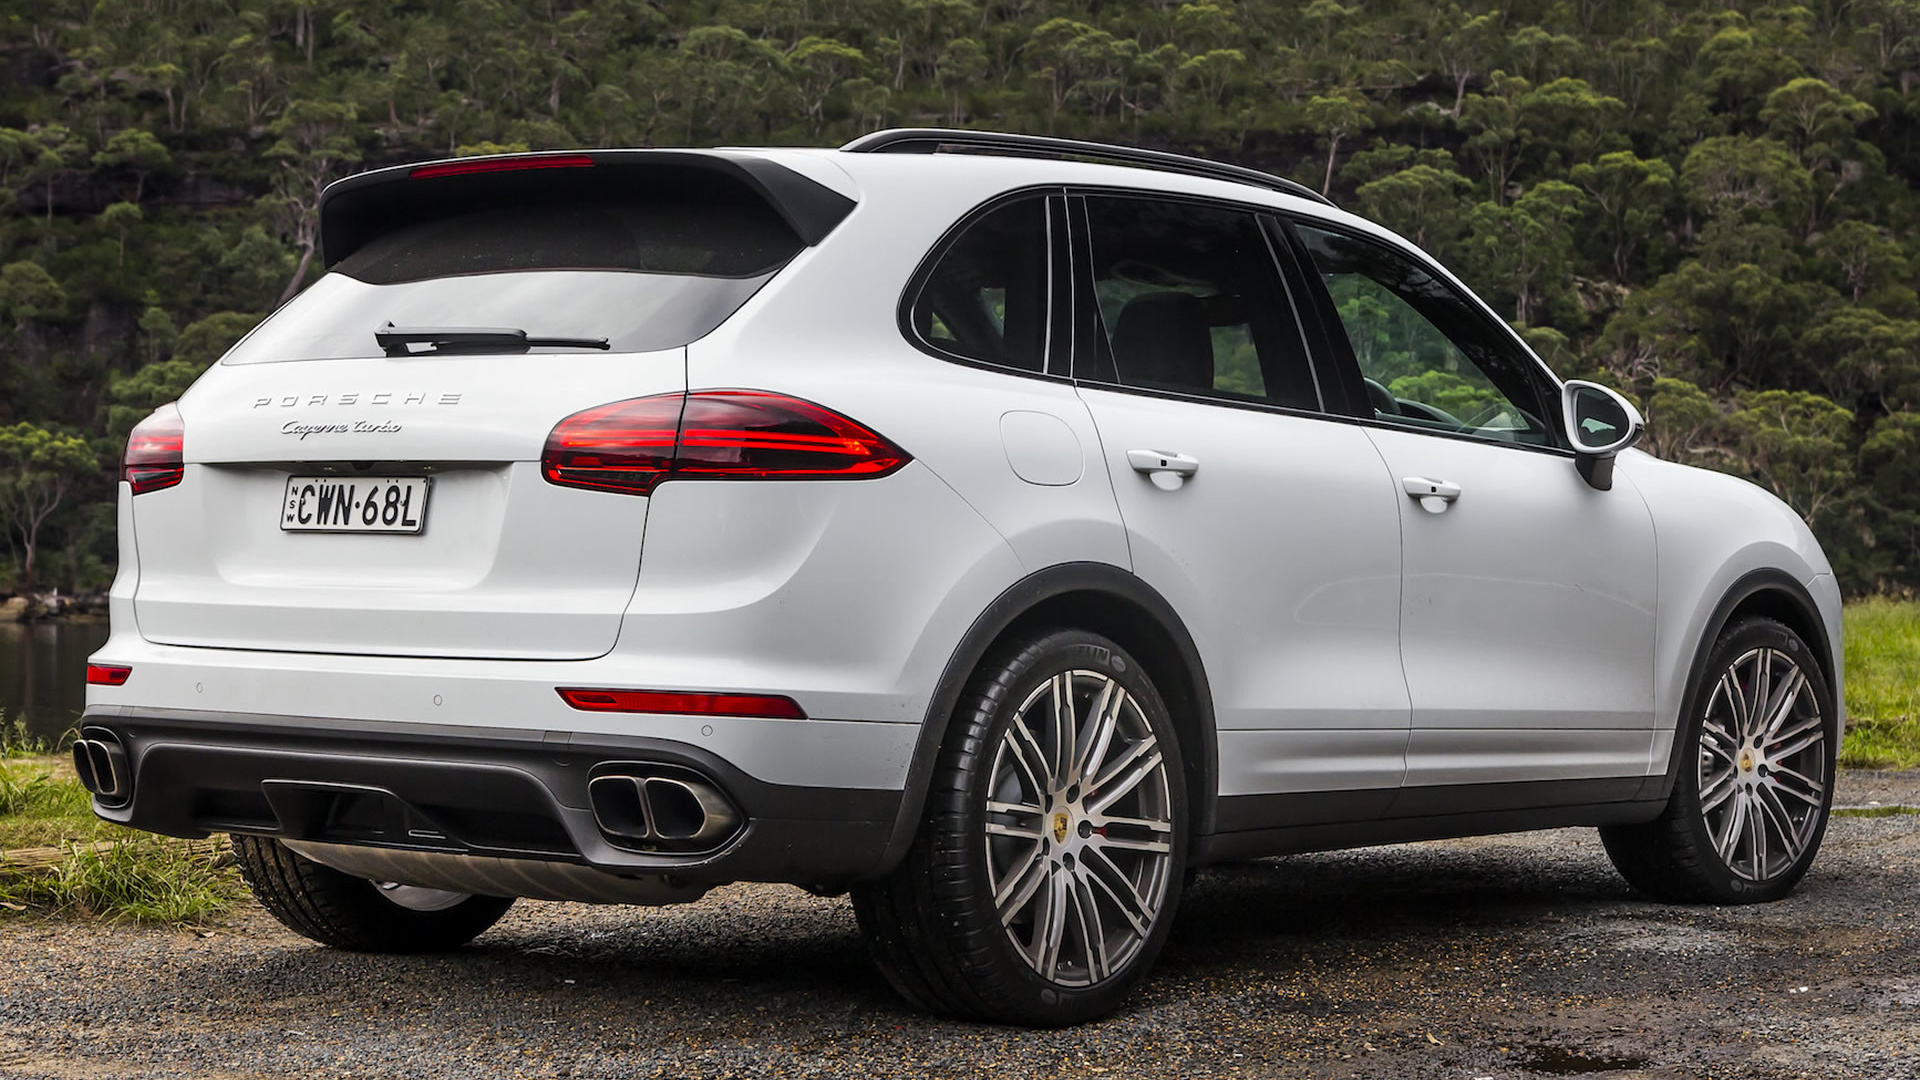 2014 Porsche Cayenne Turbo (AU) - Wallpapers and HD Images | Car Pixel